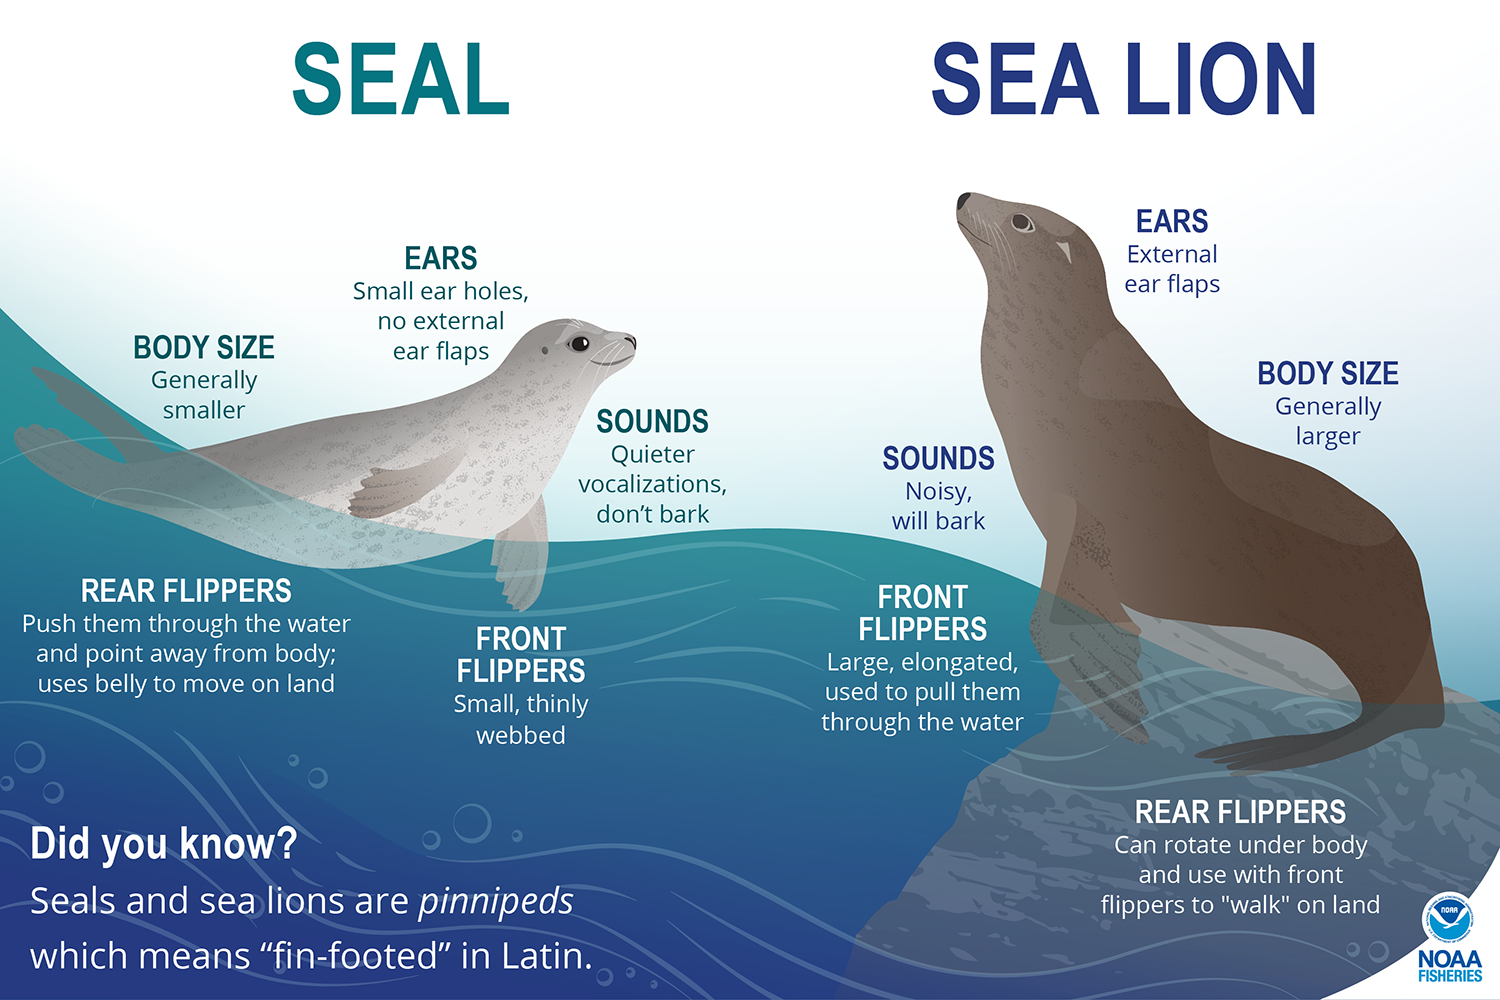 What's the difference between seals and seal lions? | NOAA Fisheries